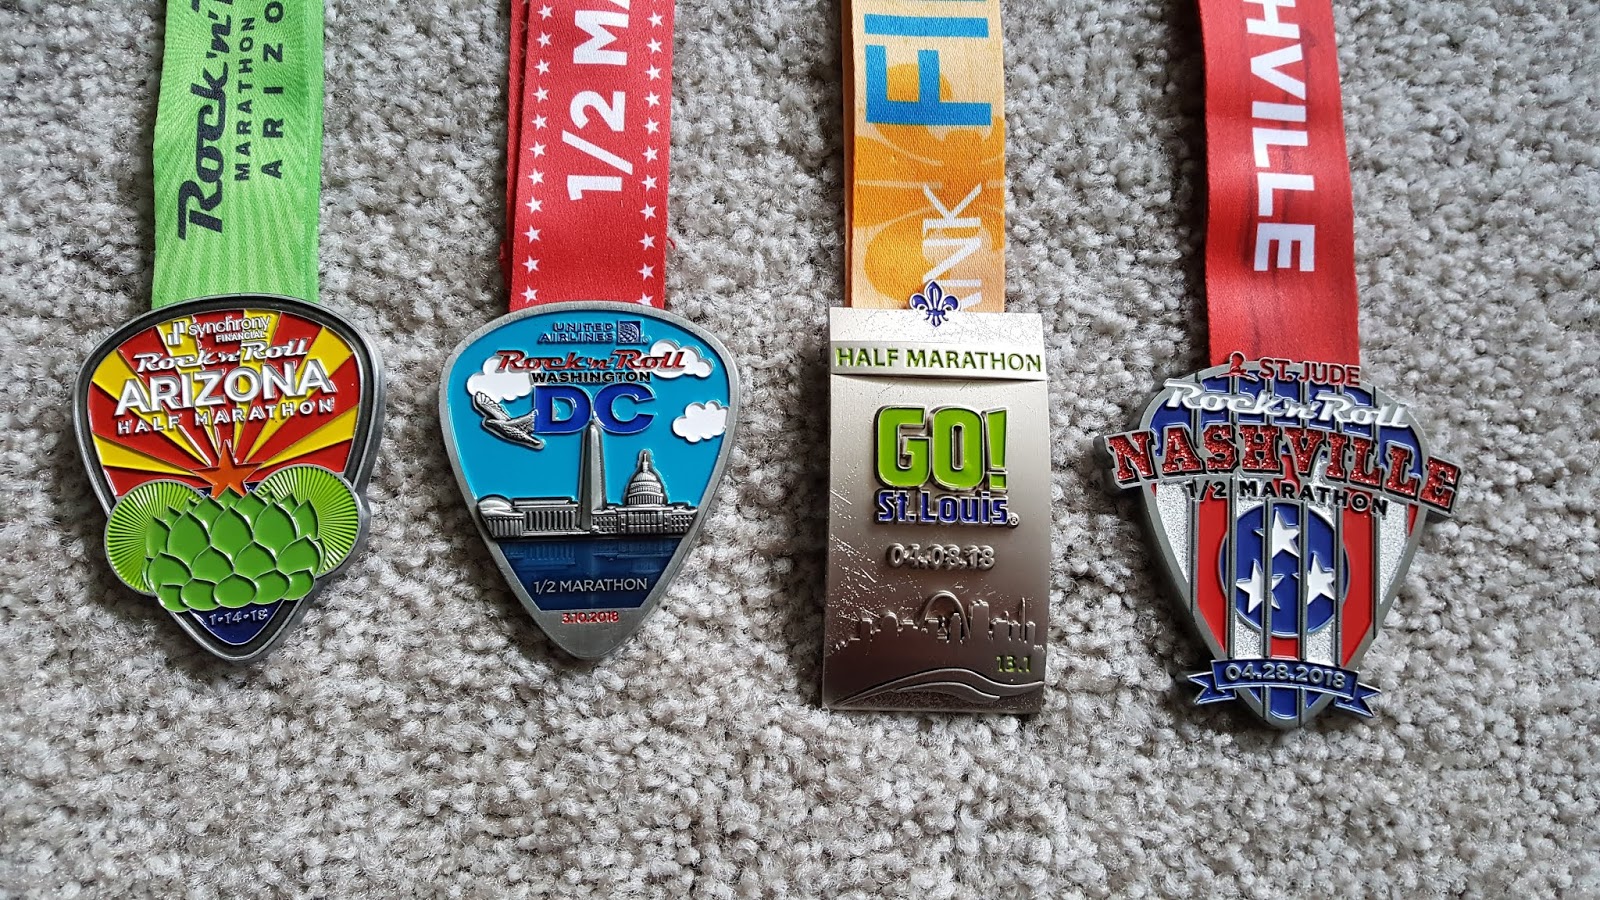 Will Run For A Medal: Looking back on 50 half marathons